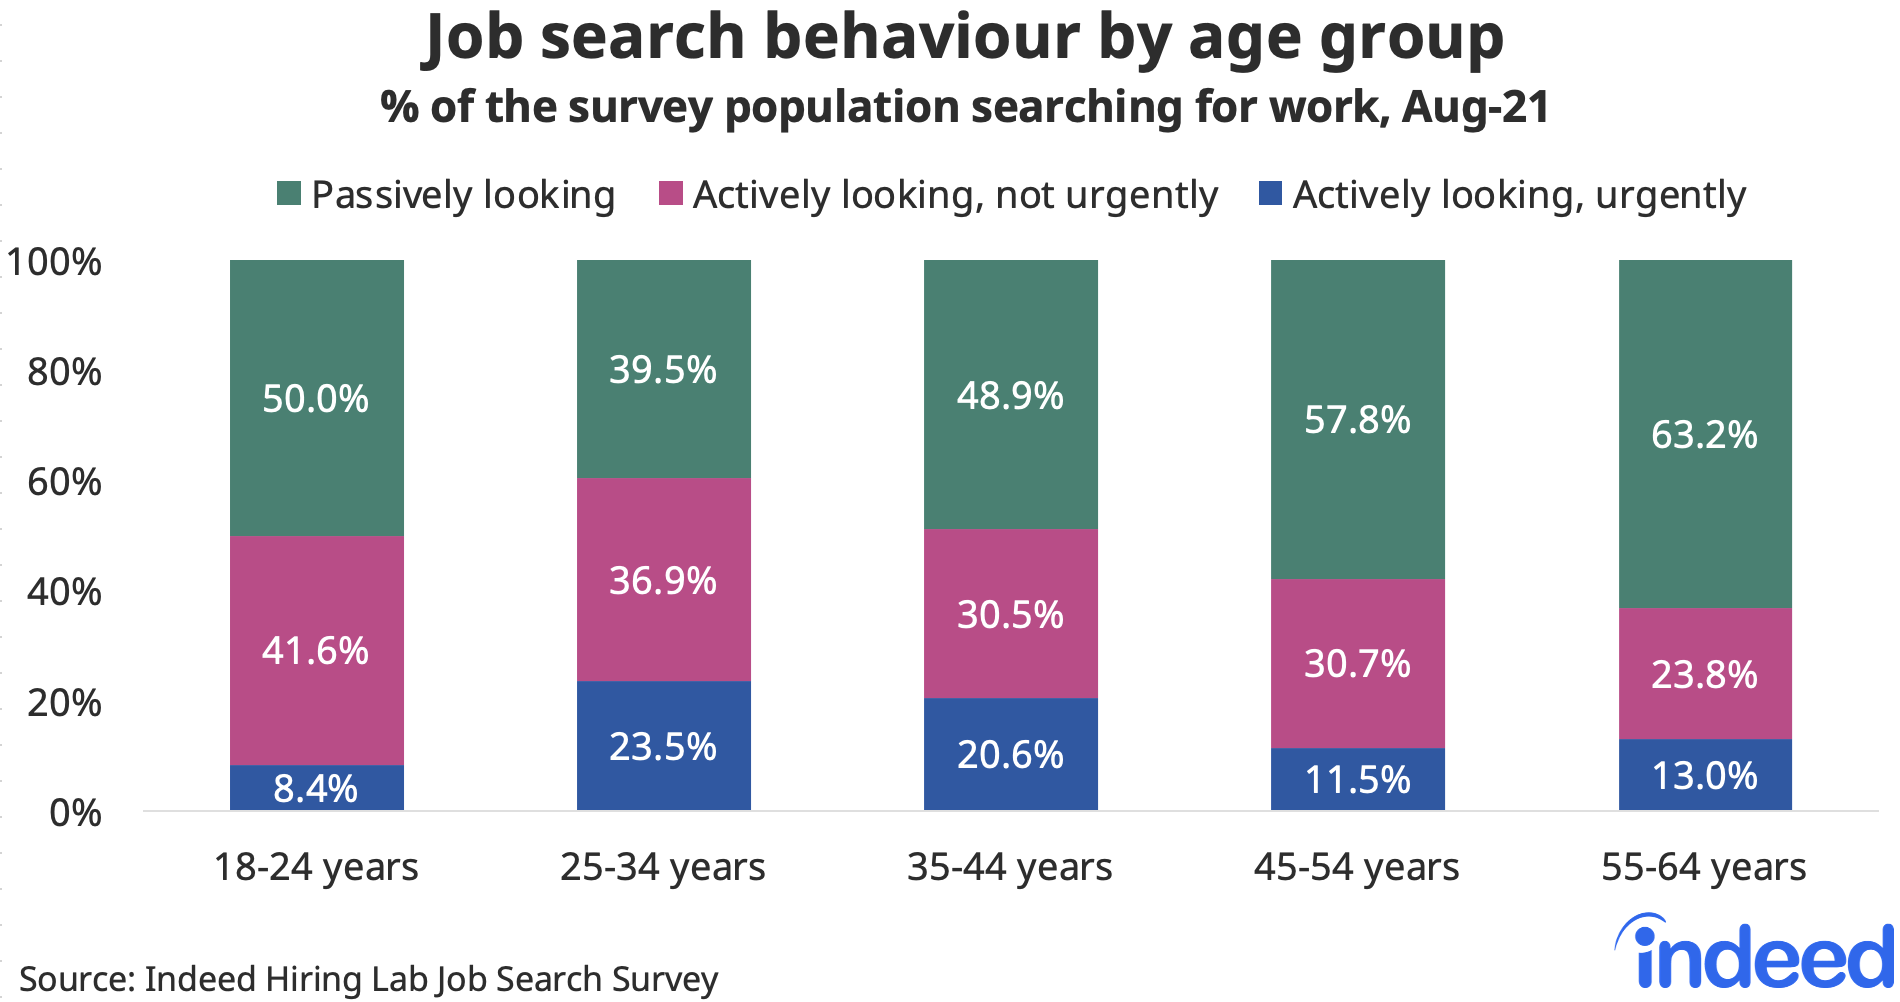 Bar chart titled “Job search behaviour by age group.”